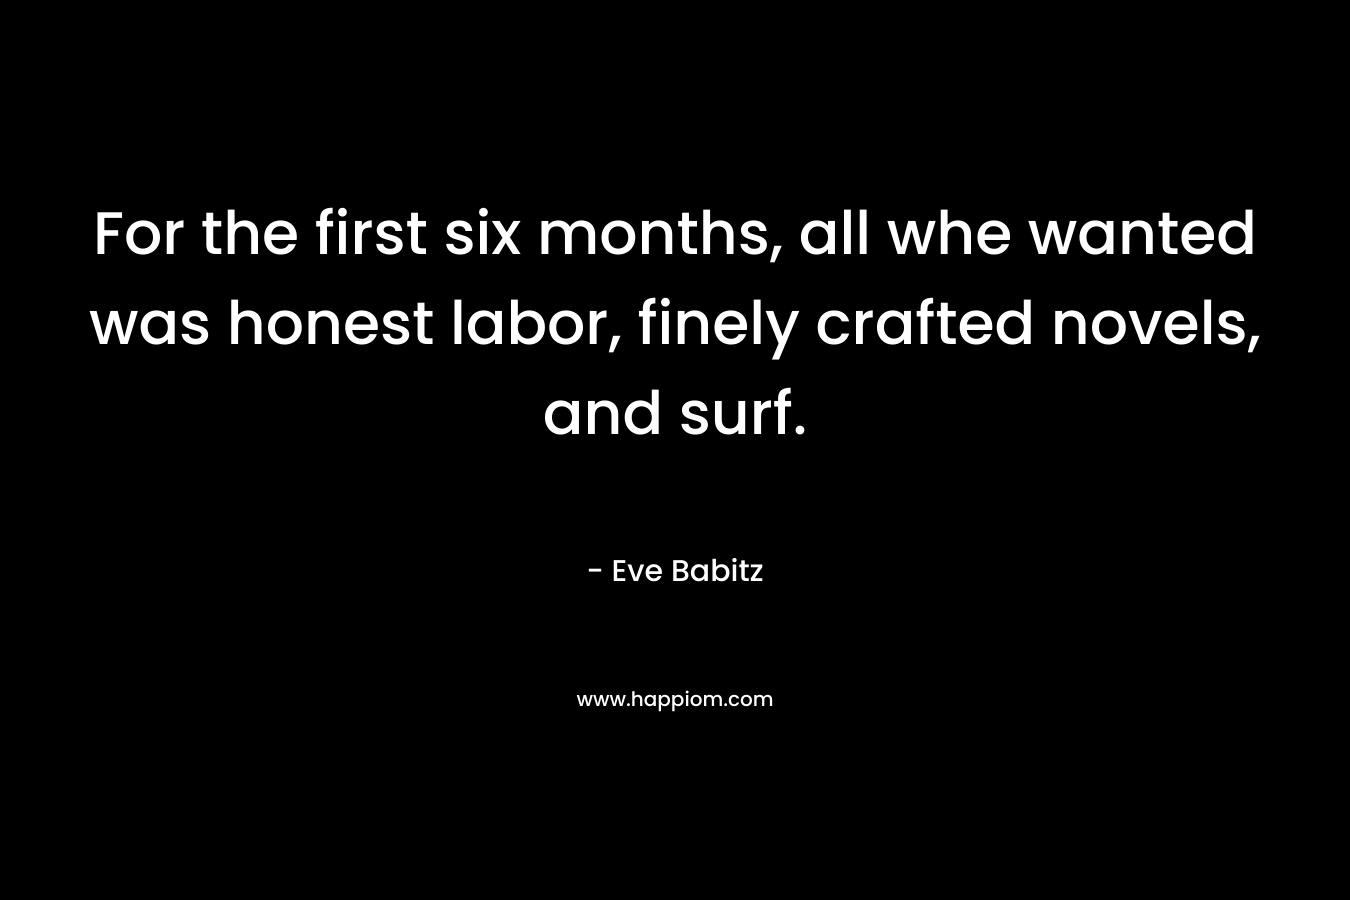 For the first six months, all whe wanted was honest labor, finely crafted novels, and surf. – Eve Babitz